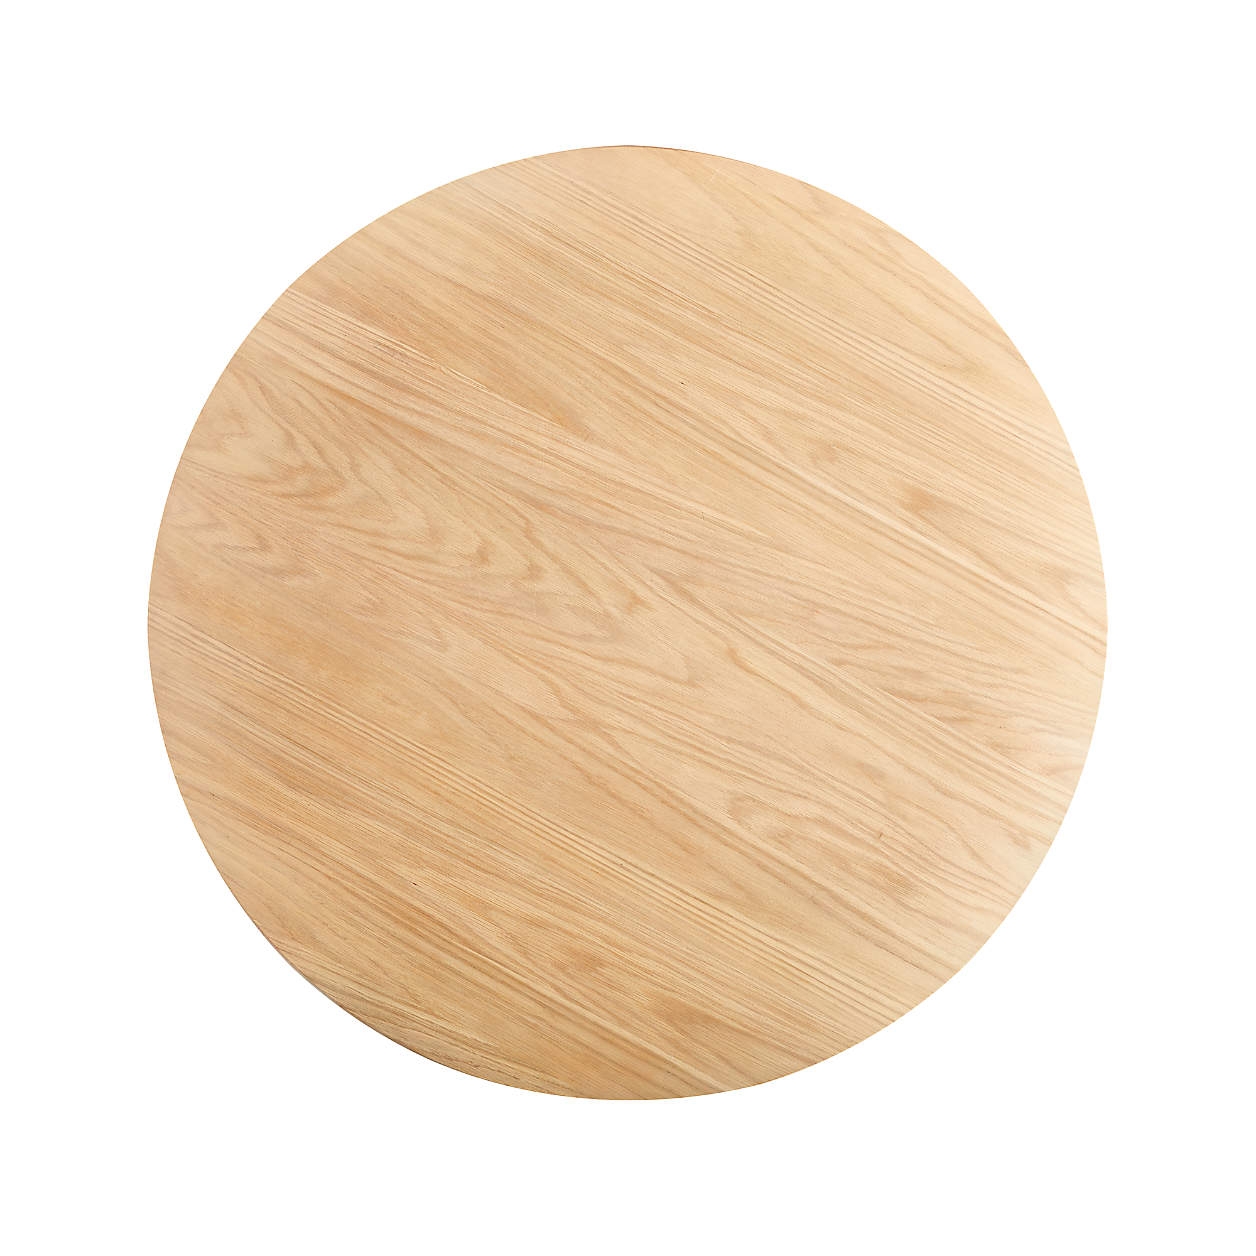 Tom Natural White Oak Wood 40" Round Three-Legged Coffee Table by Leanne Ford - Image 7